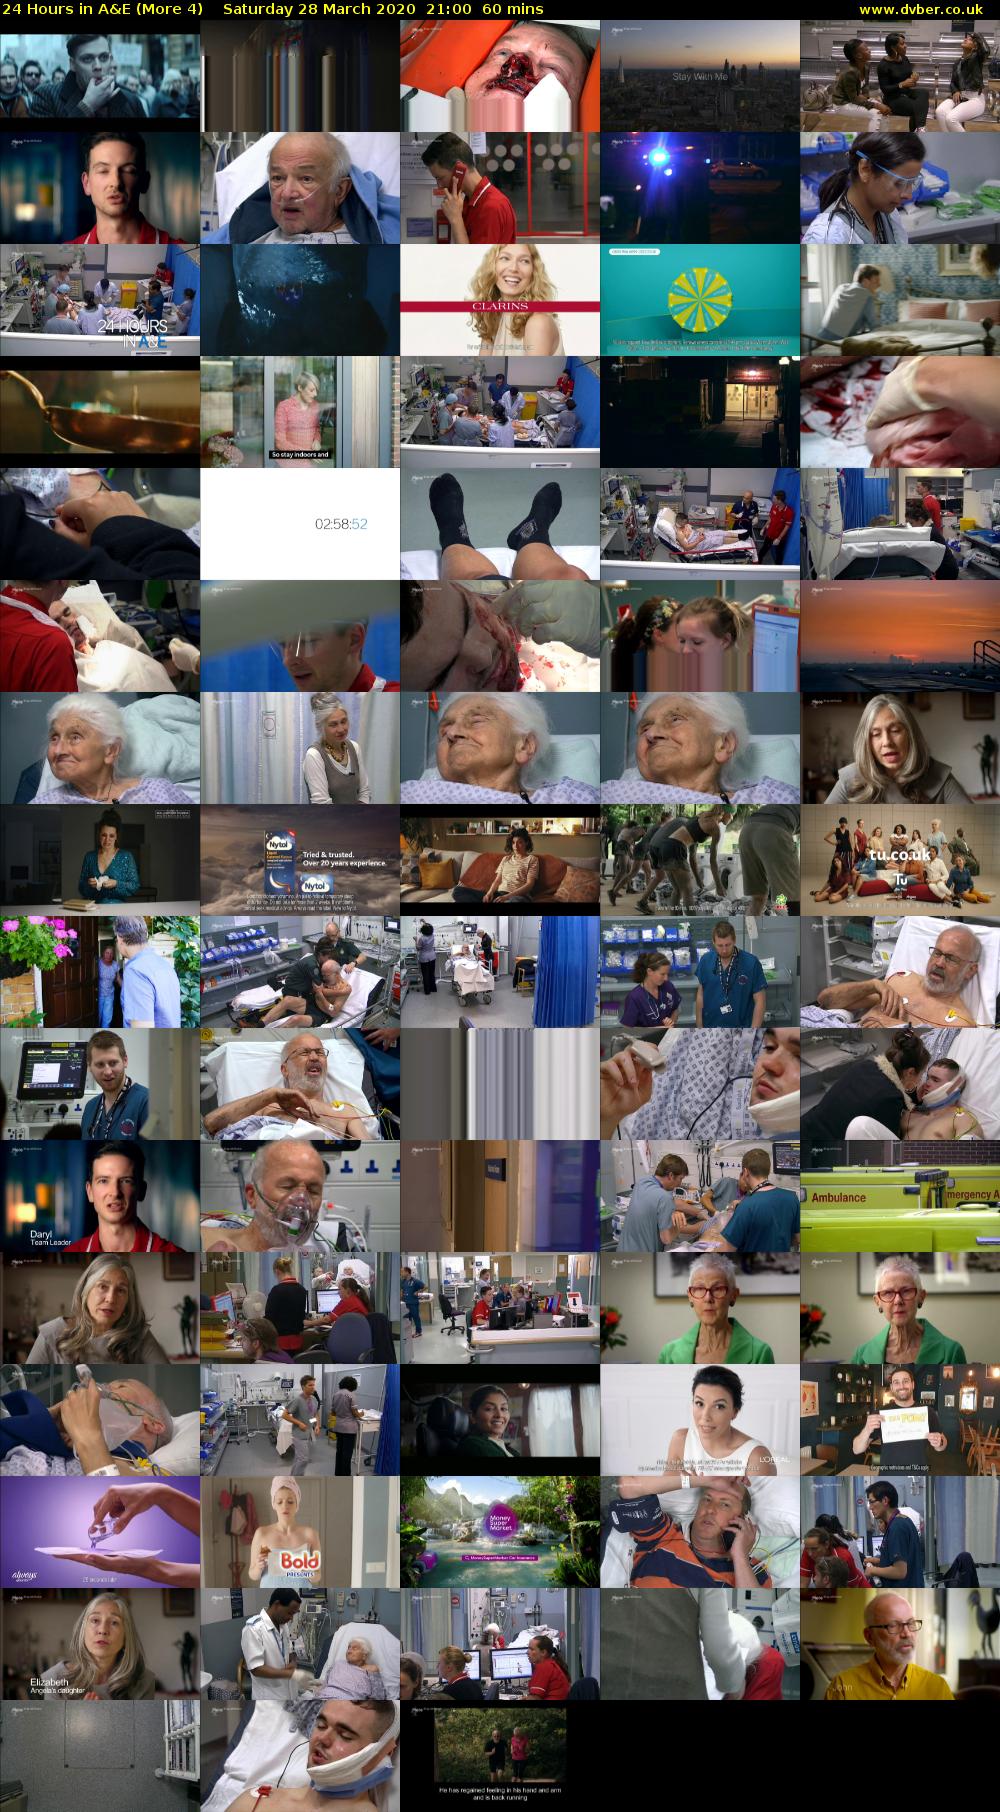 24 Hours in A&E (More 4) Saturday 28 March 2020 21:00 - 22:00